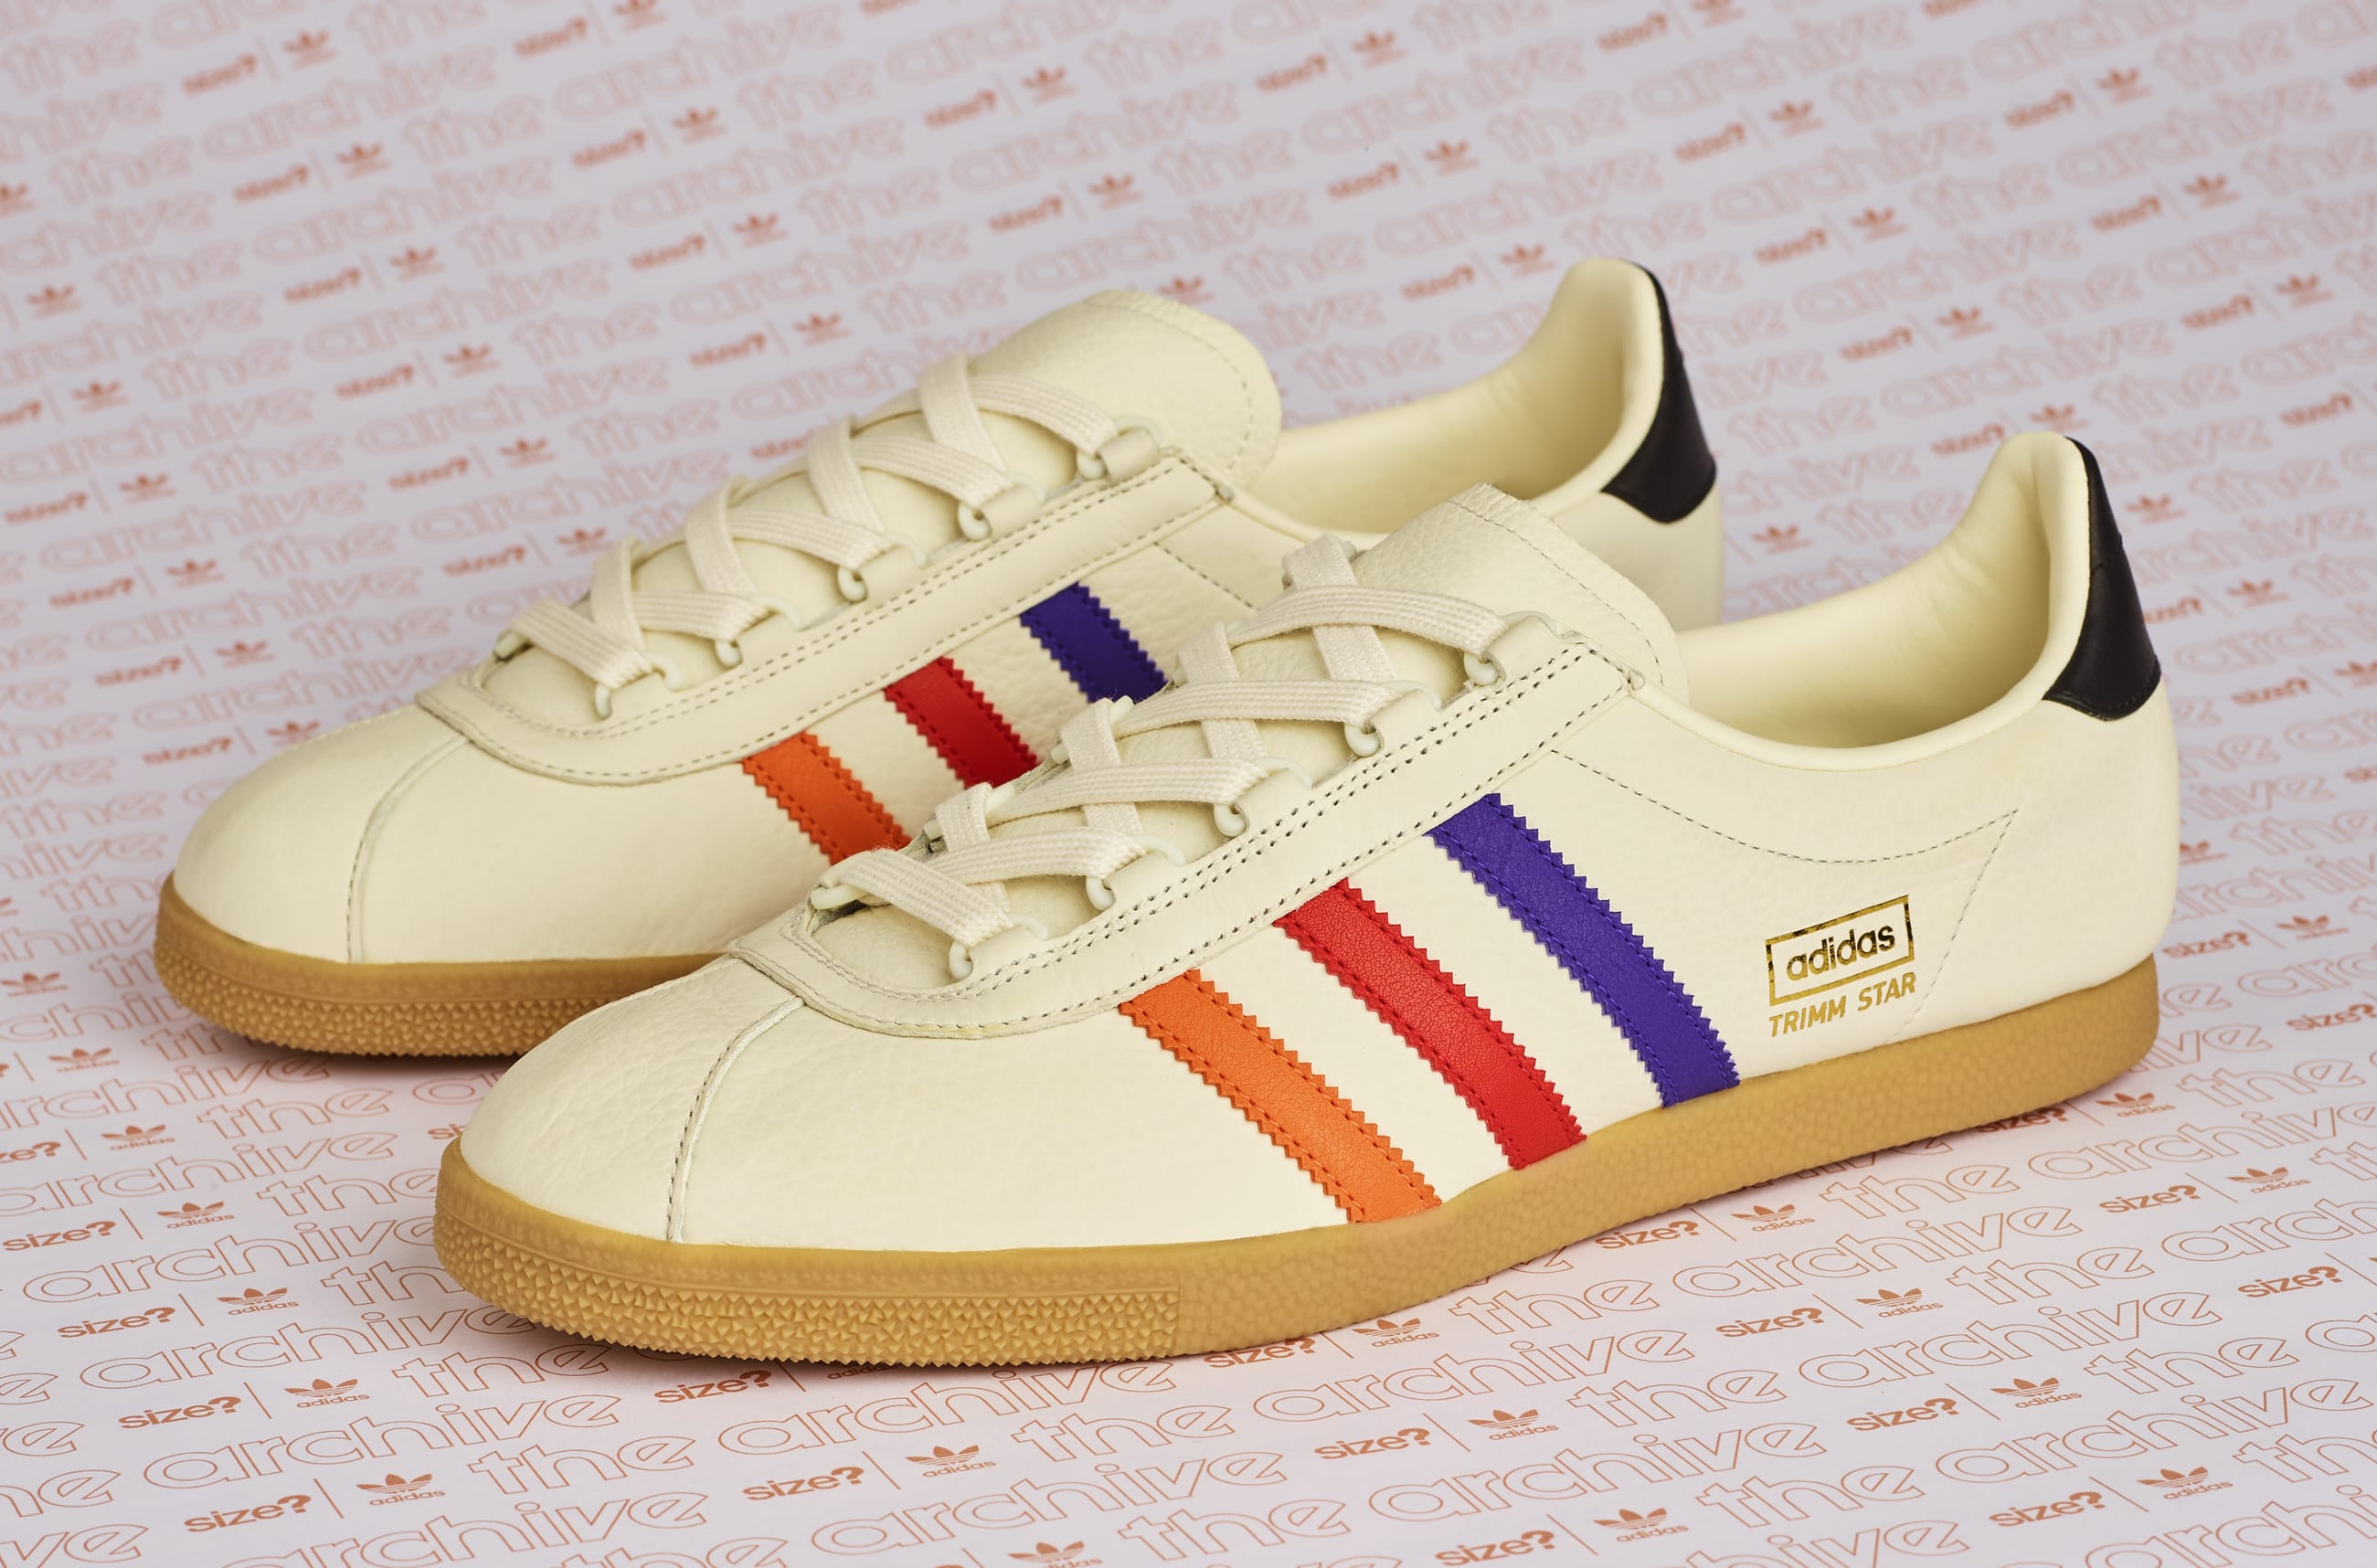 adidas trimm star new release 2019